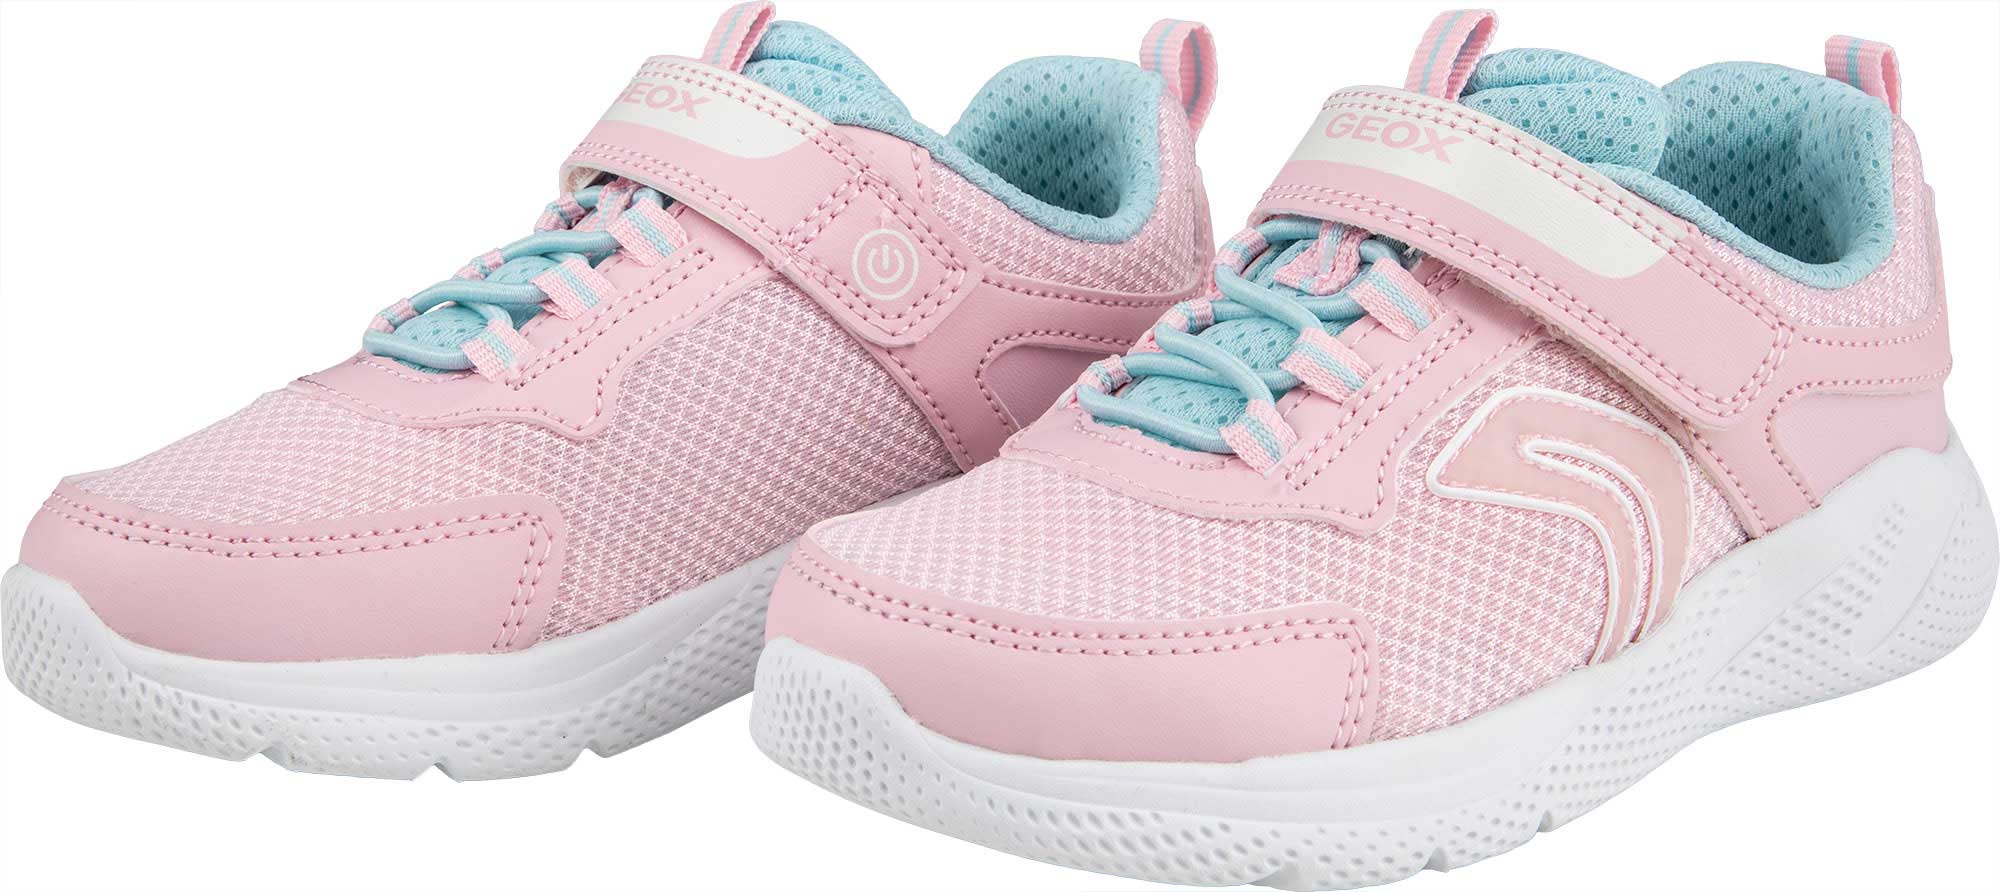 Girls' leisure shoes